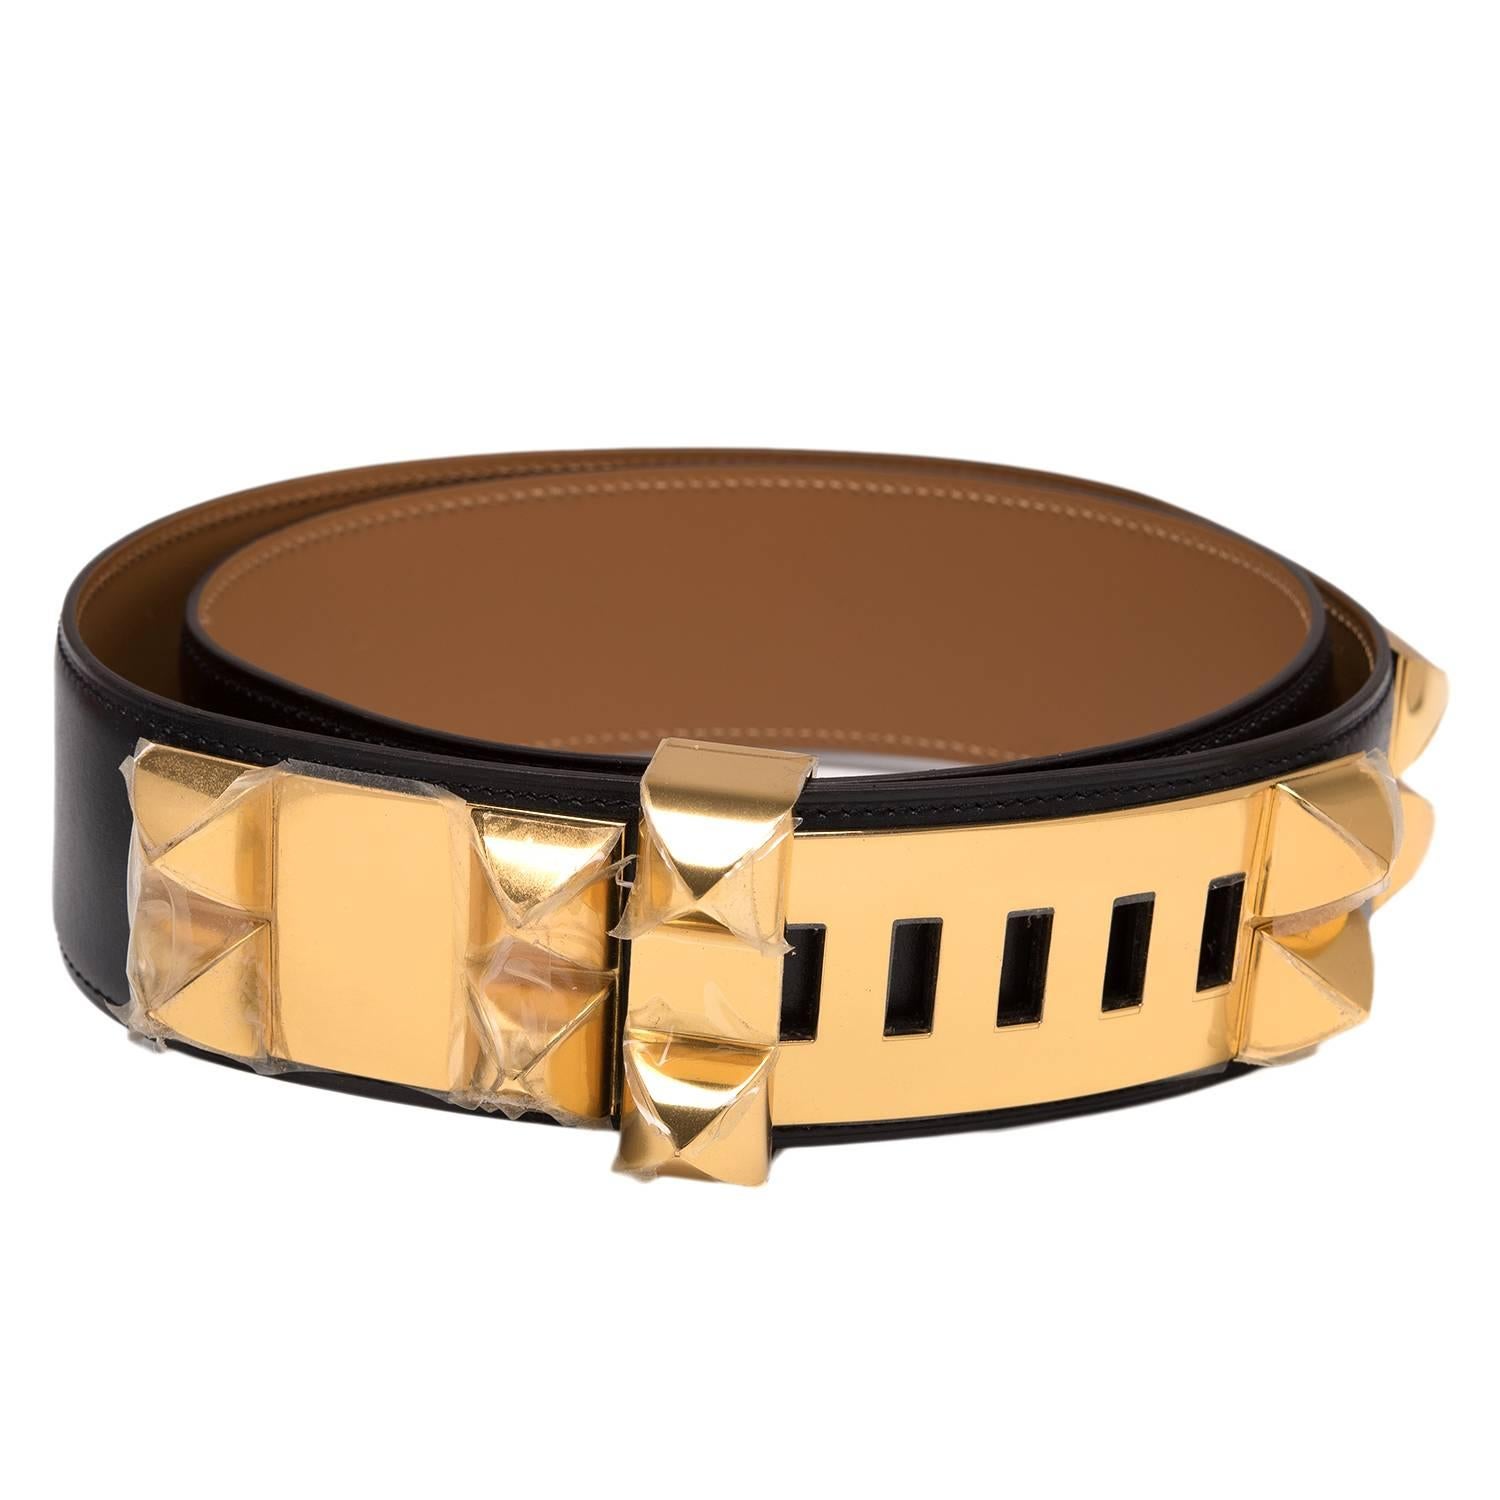 Hermes Black Collier de Chien Medor belt in calfskin leather with gold plated studded hardware, tonal stitching and adjustable gold plated closure. 

Origin: France

Condition: Pristine; never worn (plastic on hardware)

Accompanied By: Hermes